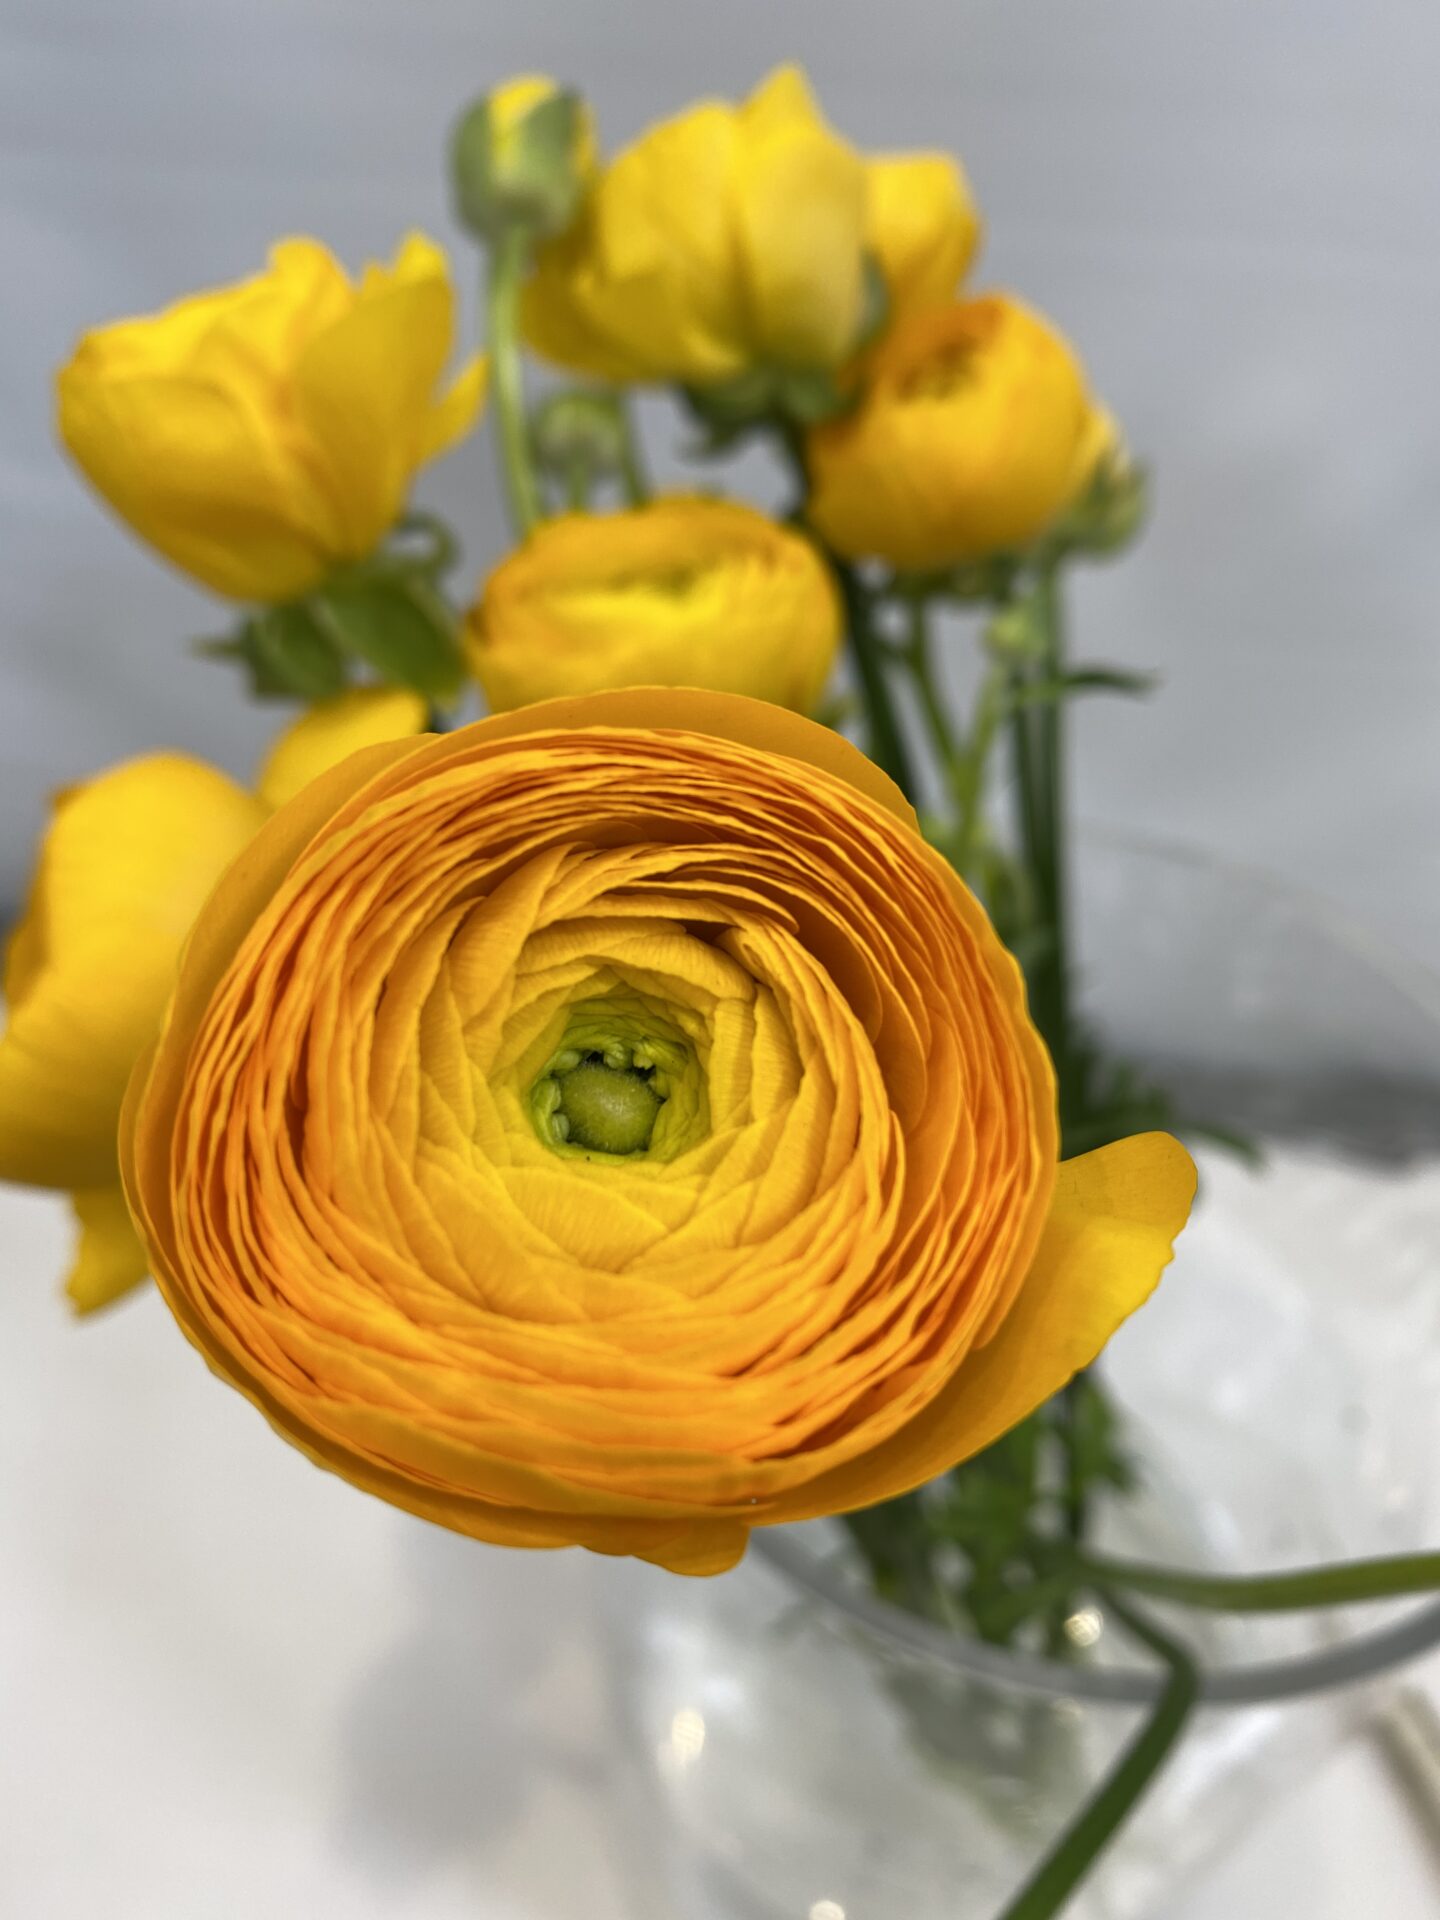 yellow ranunculus meaning